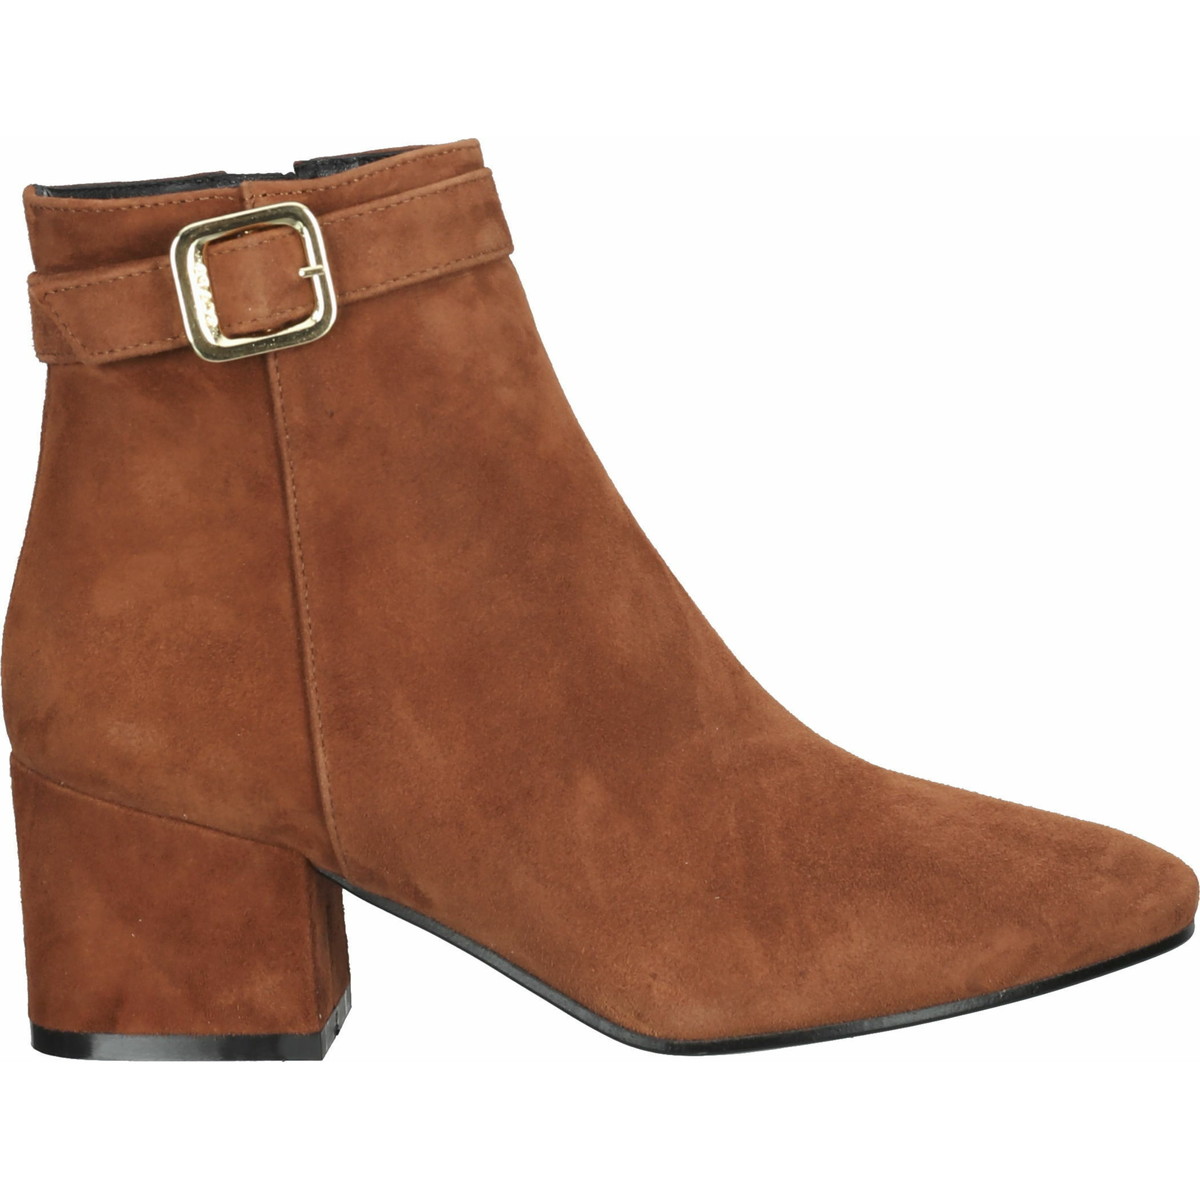 Chaussures Femme Boots Scapa Bottines Marron